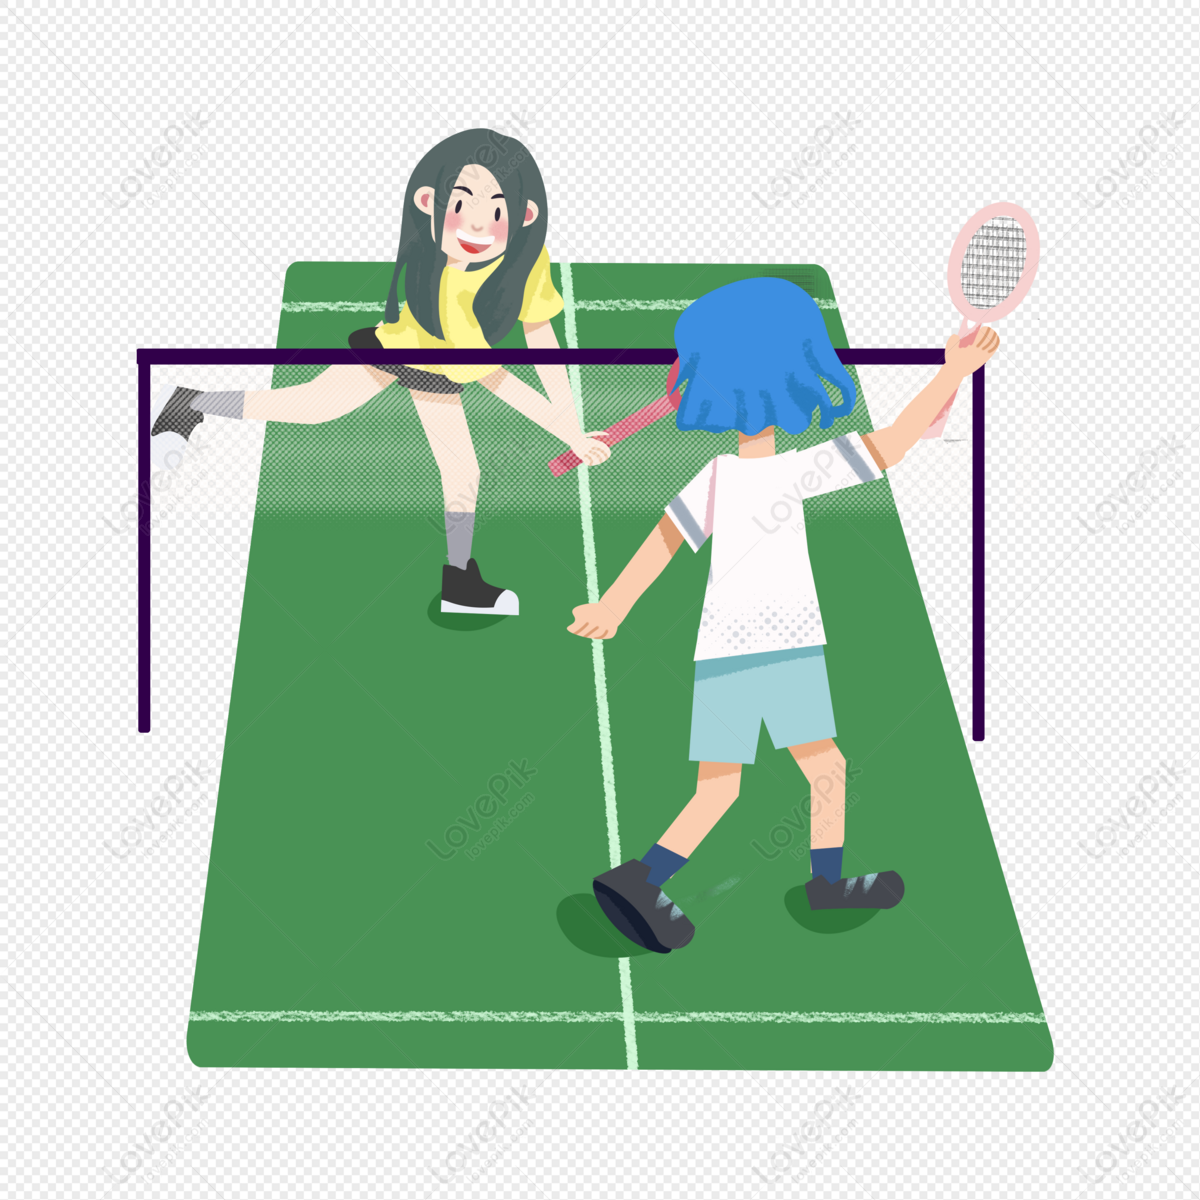 Simplistic 2d badminton game with clean visuals on Craiyon